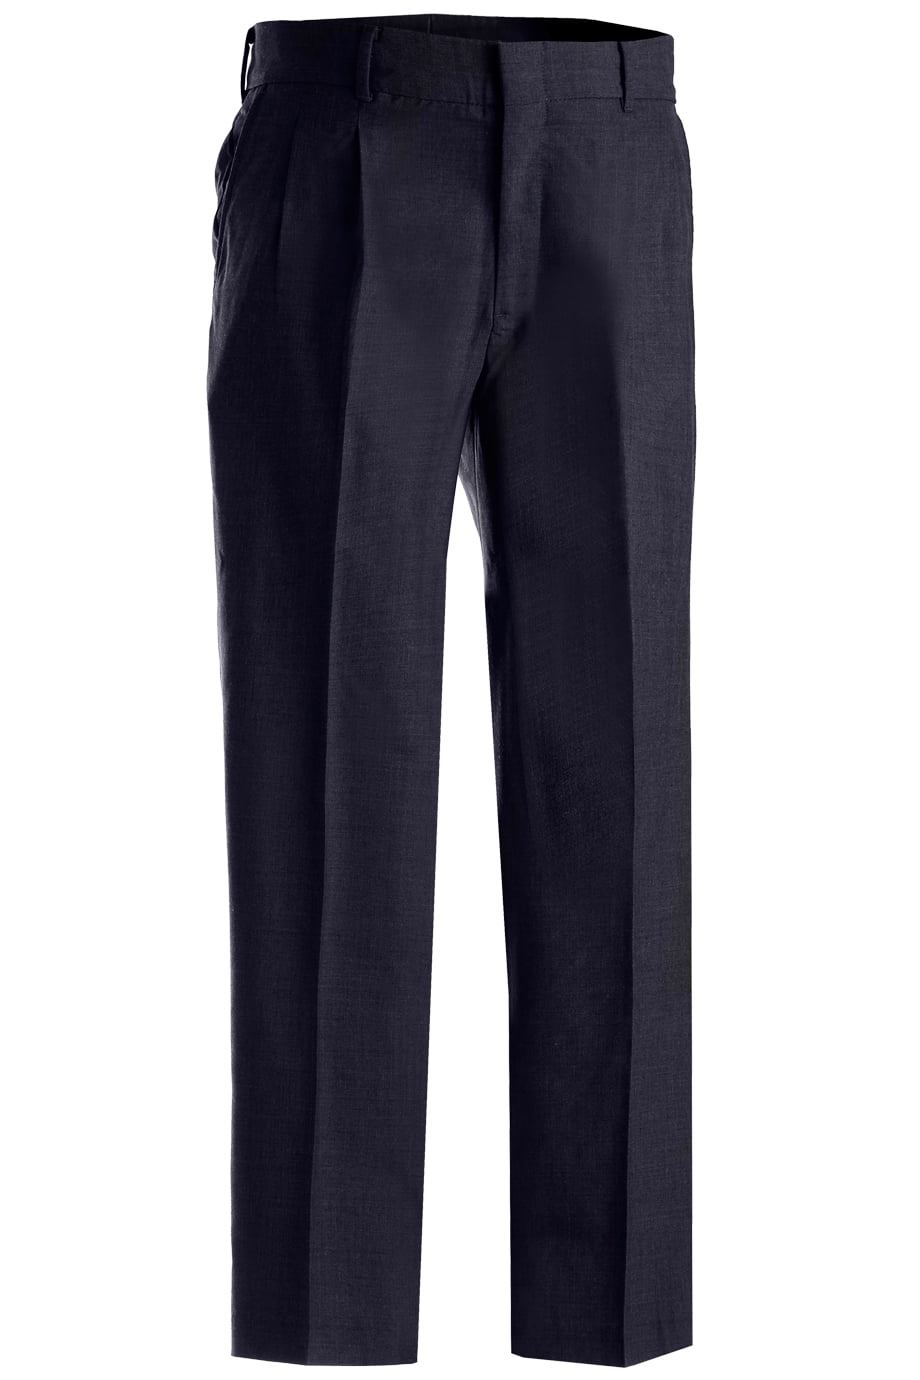 Charcoal 38 30 Edwards Garment Mens Washable Wool Blend Pleated Pant 